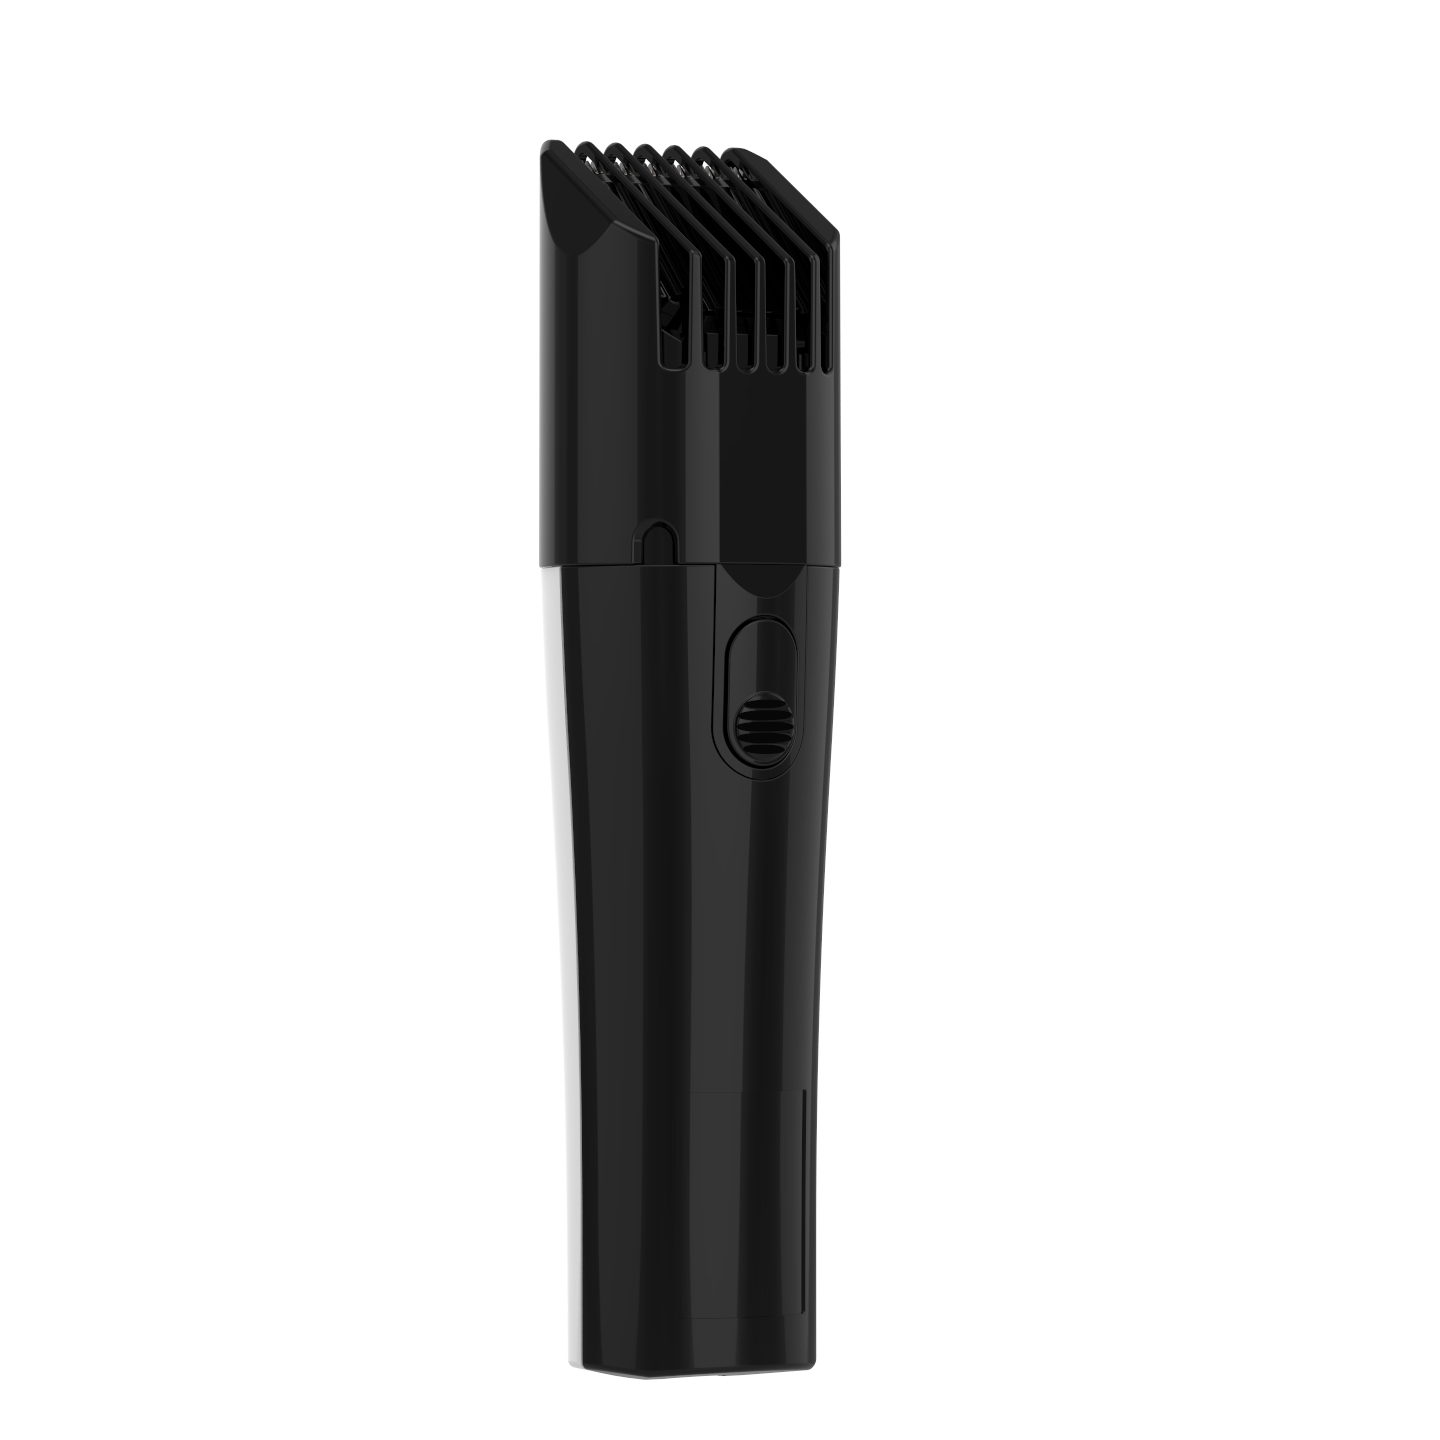 BEWEBEME Beard Trimmer for Men Washable Men's Hair Clipper With Precision Dial,Rechargeable Hair Clippers Trimmer with Adjustable 10 Length Setting,